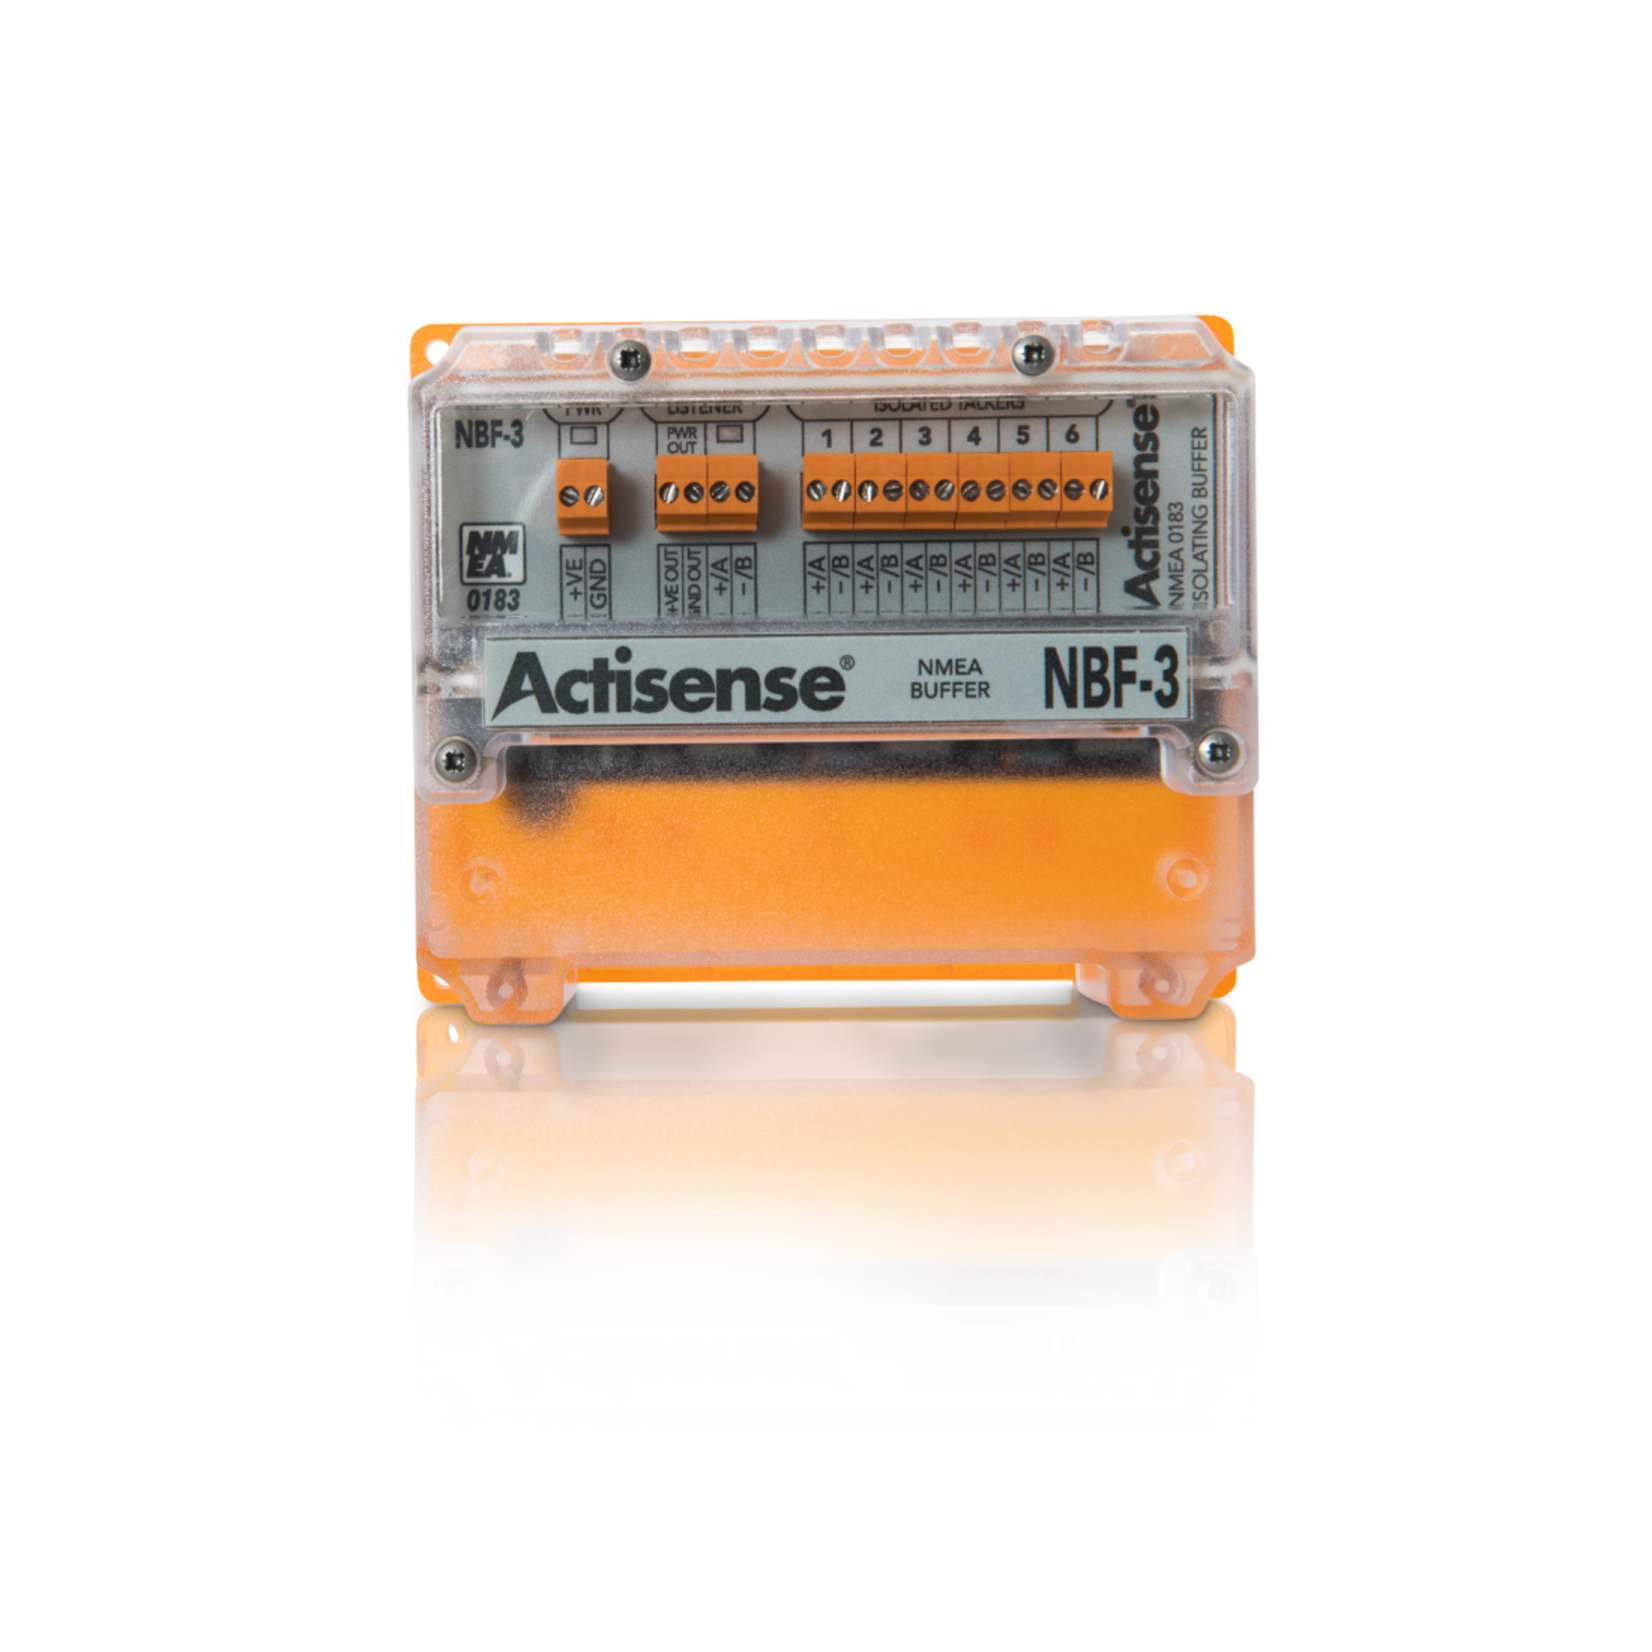 Actisense 1 OPTO input, 6 ISO-Drive outputs and talker power feed